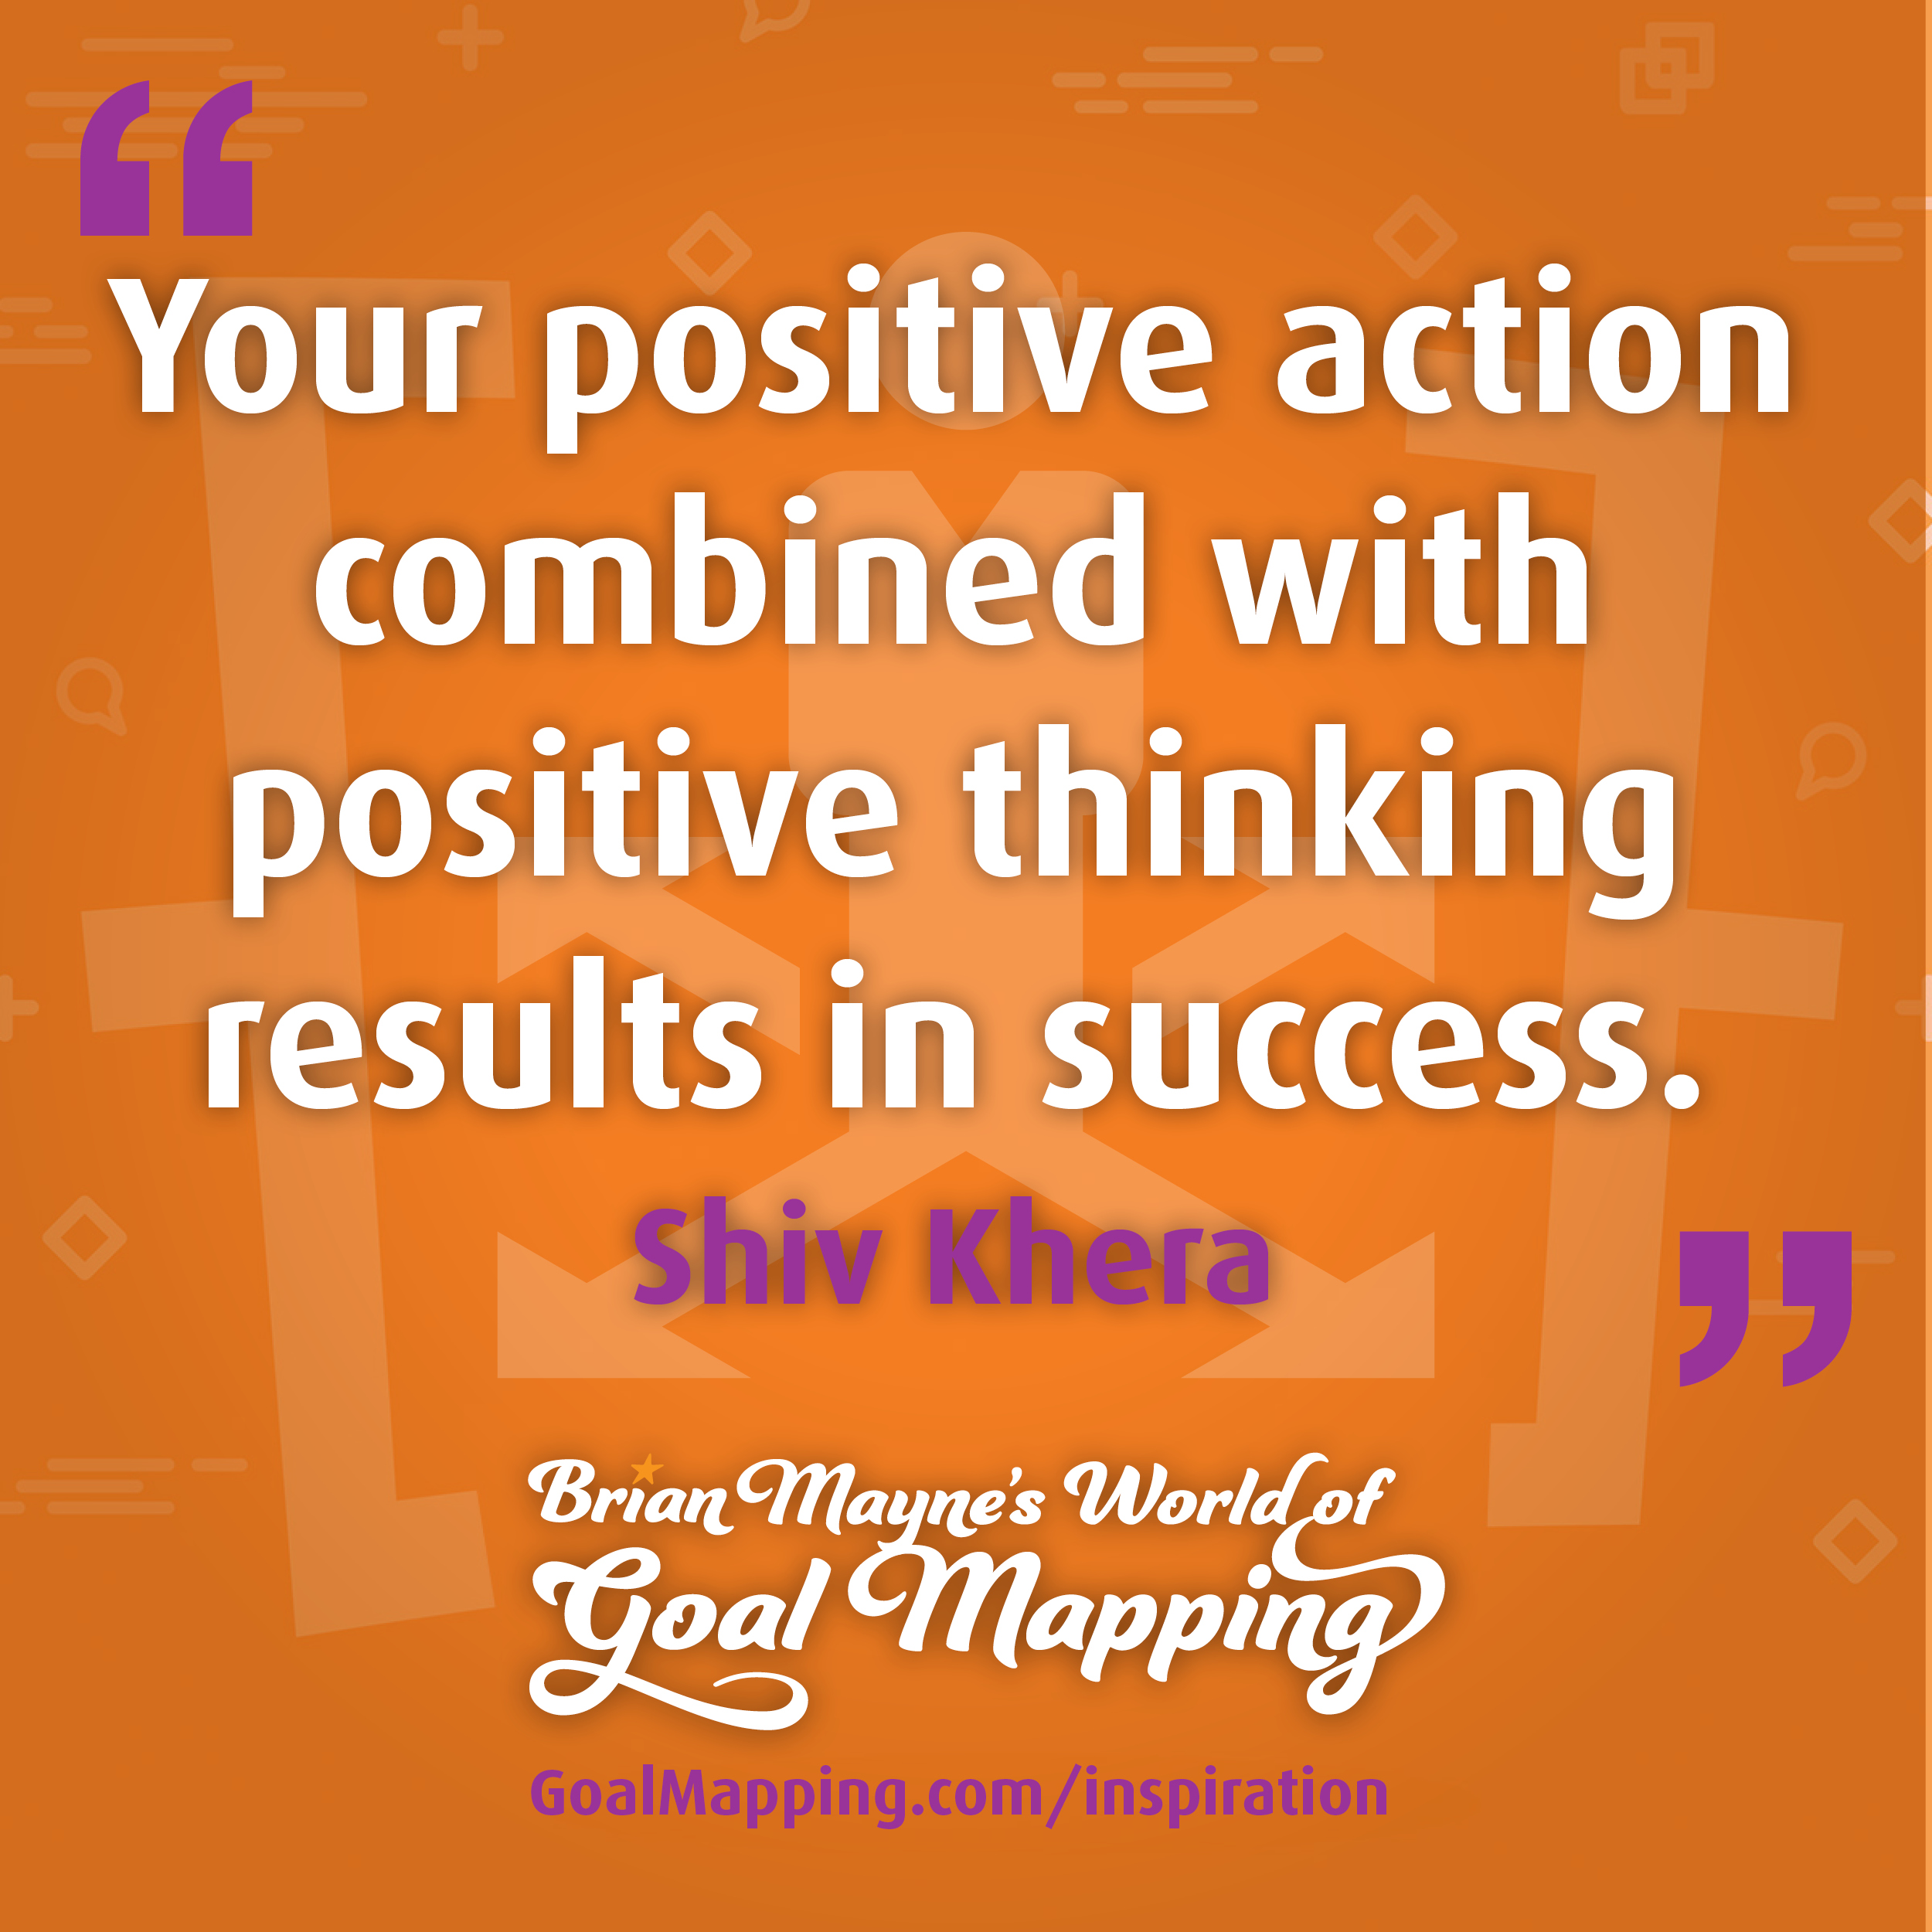 "Your positive action combined with positive thinking results in success." Shiv Khera